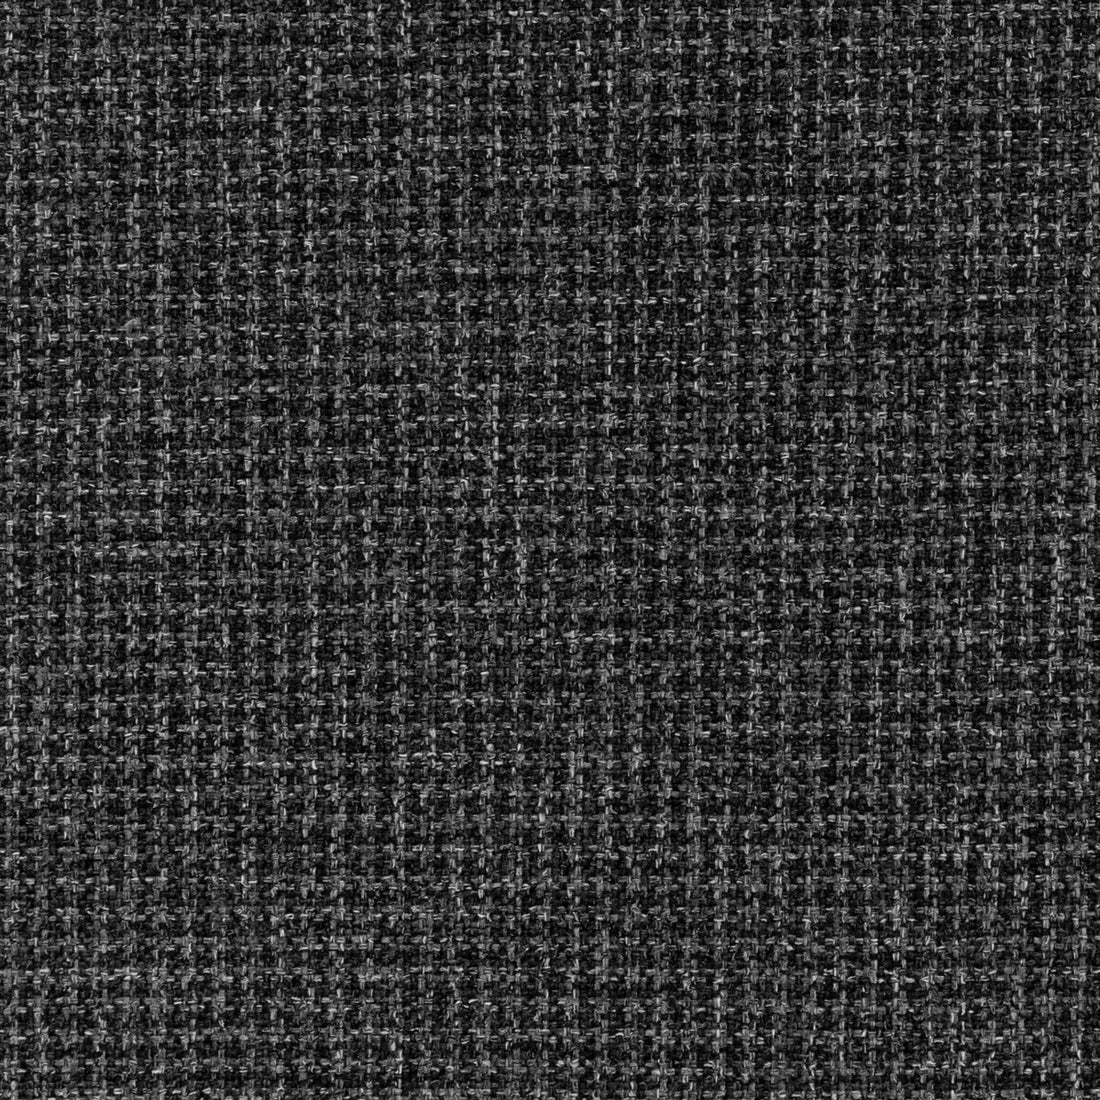 Steamboat fabric in graphite color - pattern 36258.21.0 - by Kravet Contract in the Supreen collection